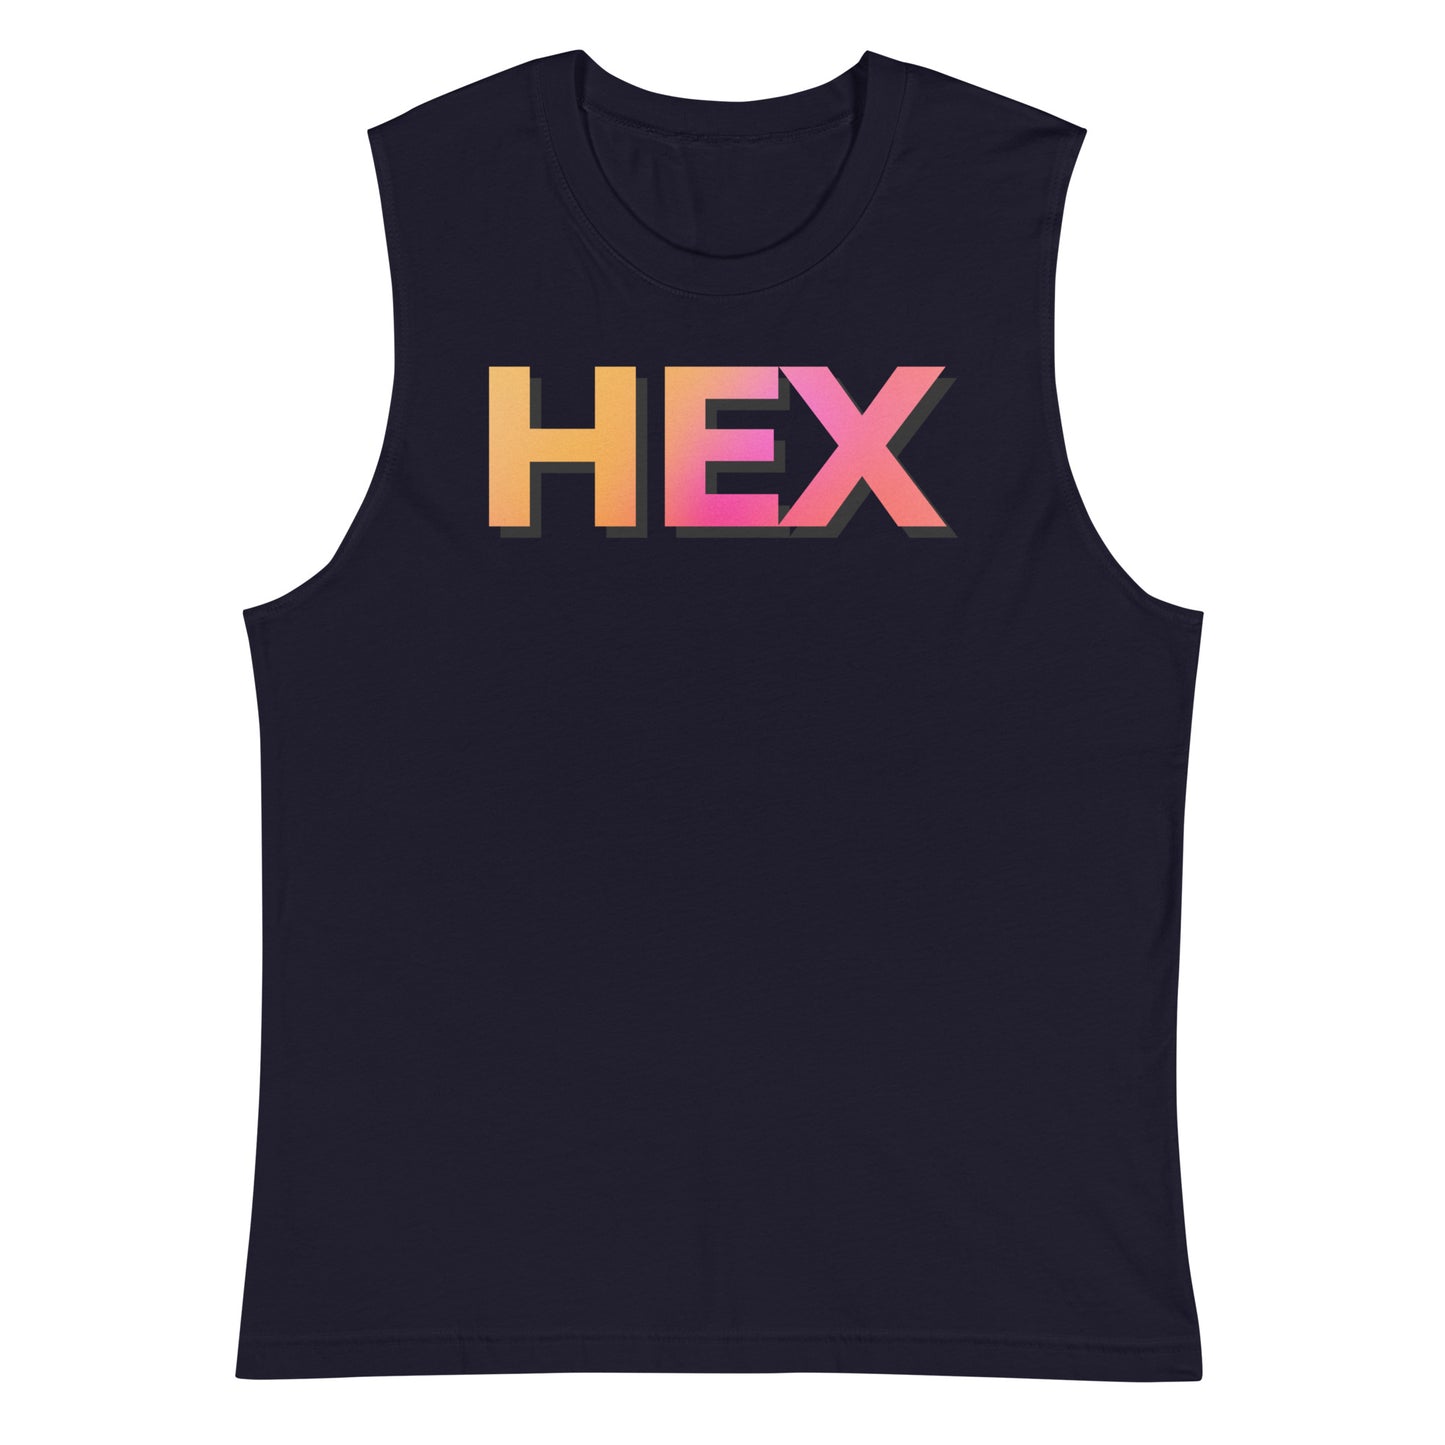 Shadowed HEX Unisex Muscle Shirt